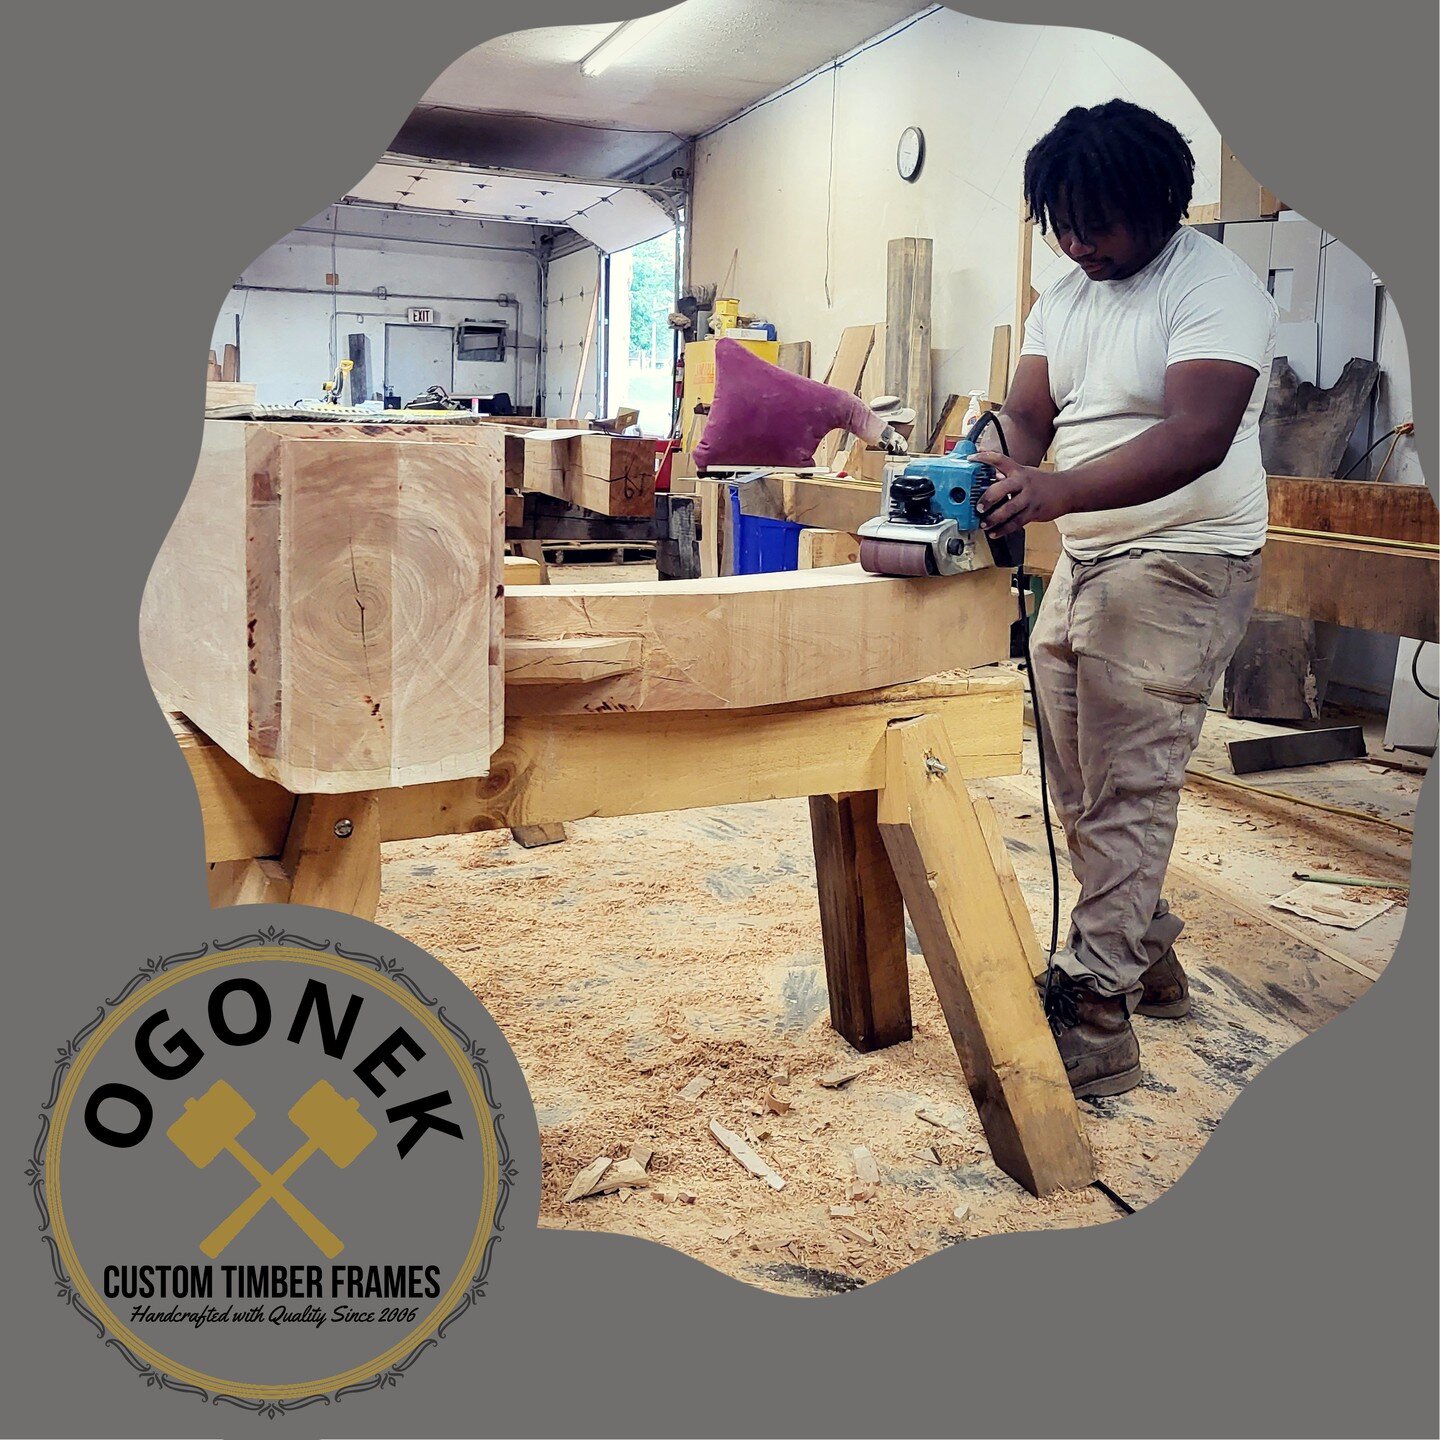 Every part of our timber frames is crafted by hand from locally-sourced, sustainably-harvested solid wood. Our precision and attention to detail allow many of our customers to install their timber frames themselves if they choose. Contact us to find 